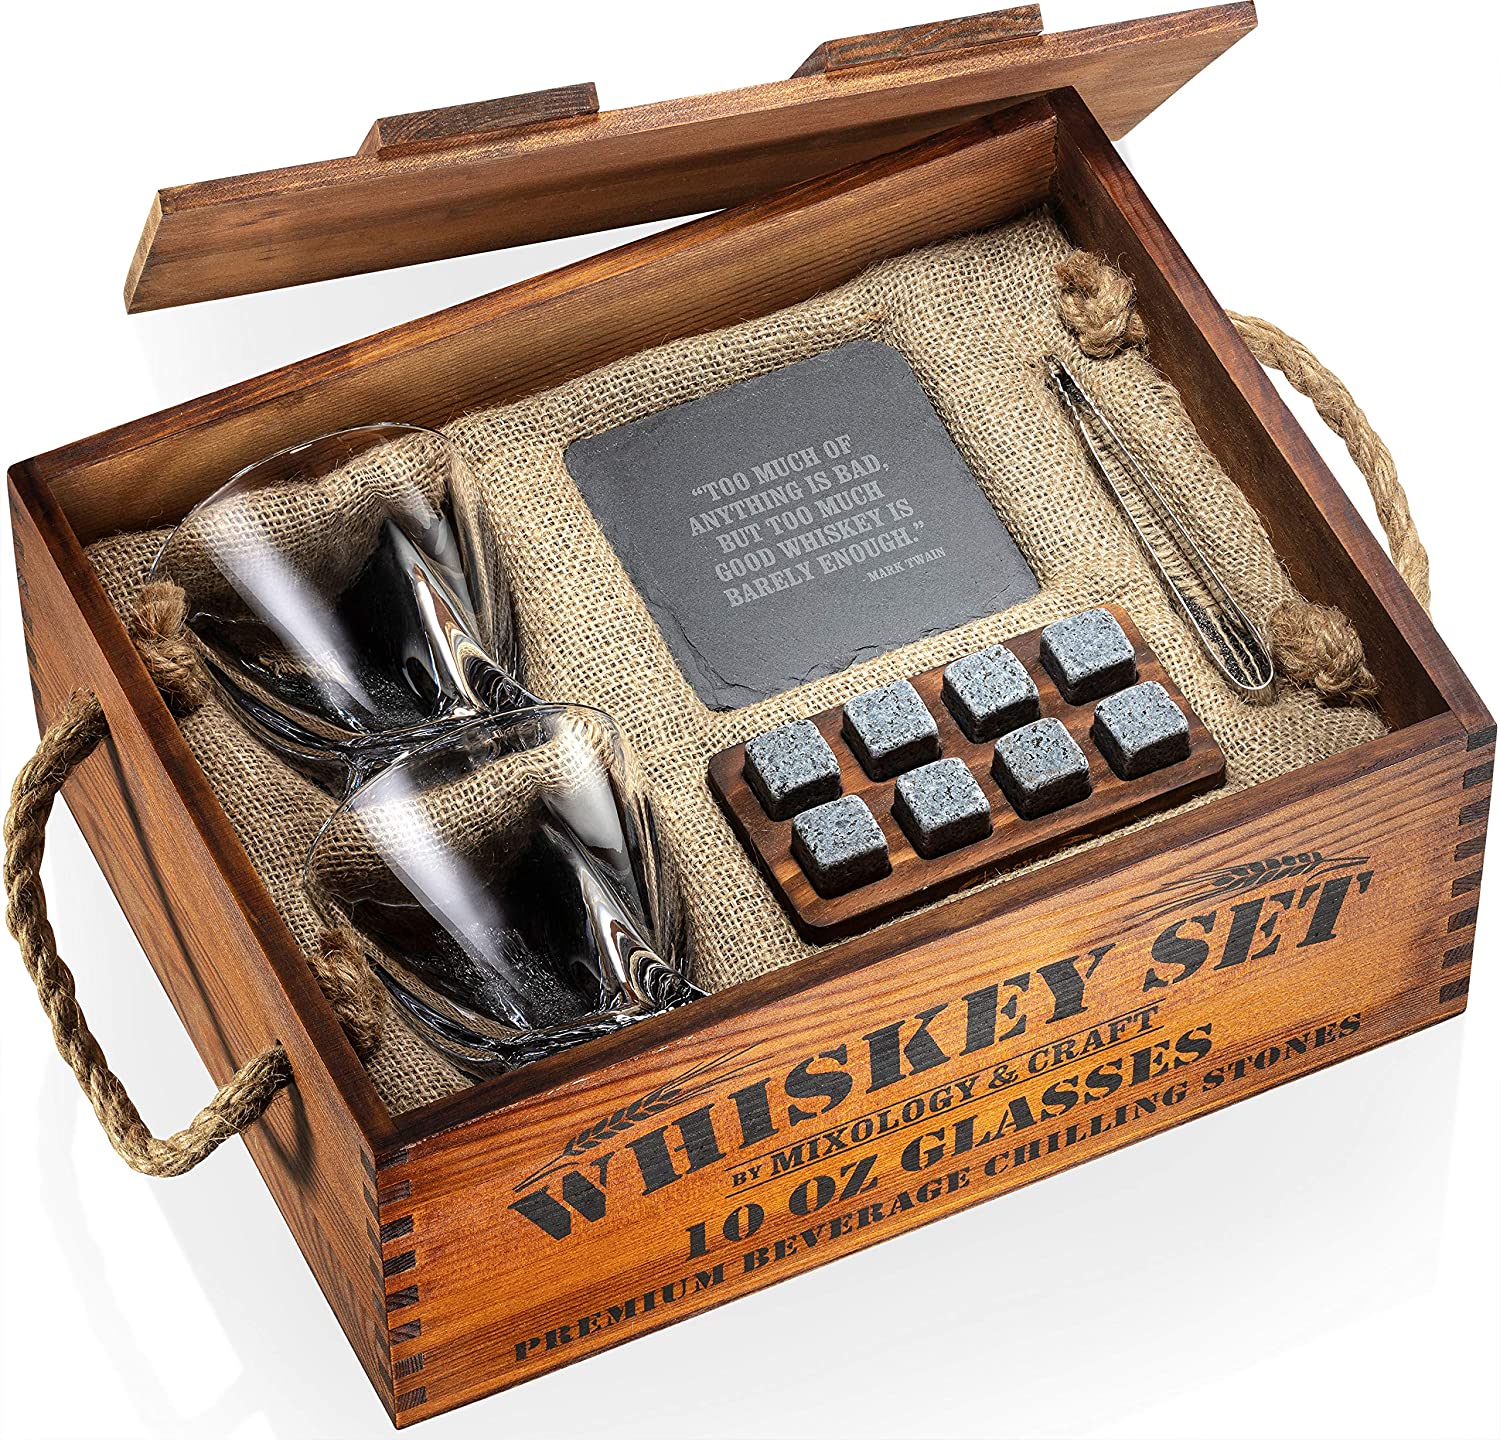 Professional Design Marble Mosaic Tile - Whiskey Stones Gift Set for Men Whiskey Glass with Rustic Wooden Crate  – Shunstone